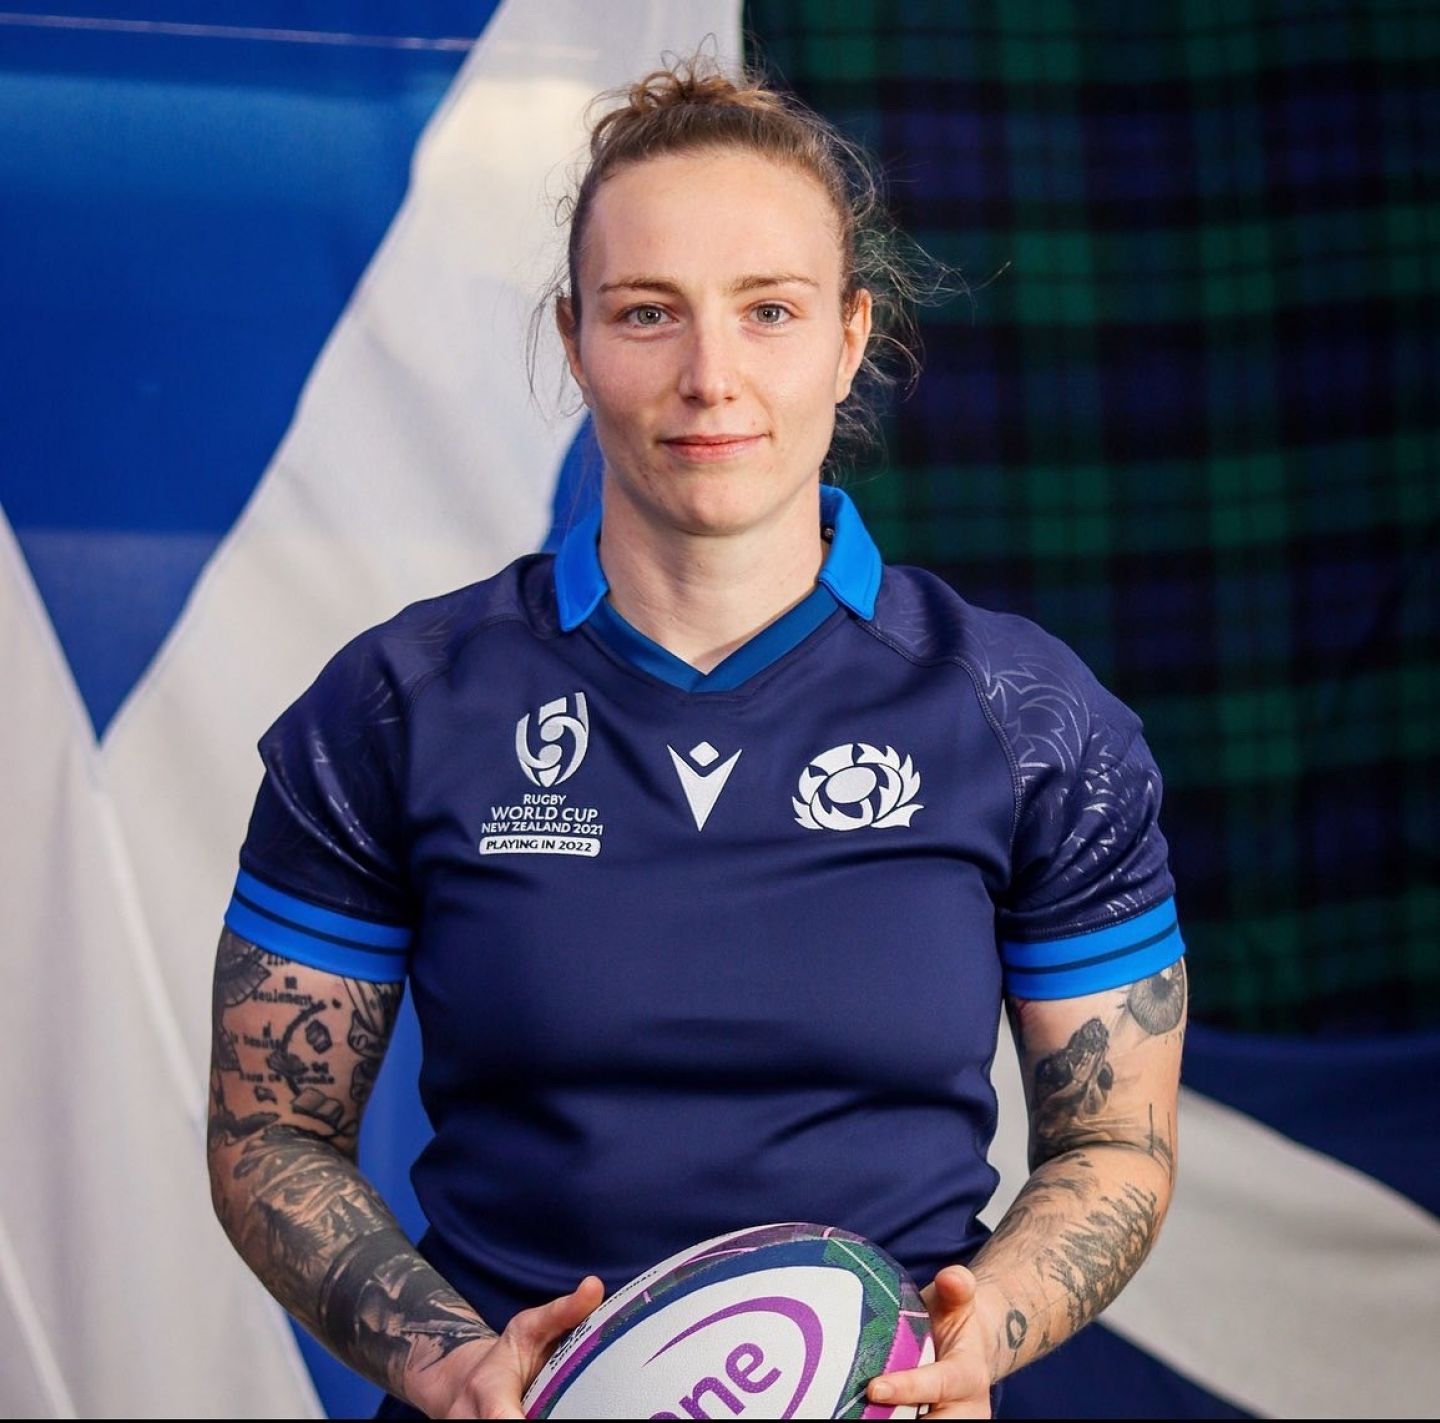 GCU Alumna and Scotland Rugby player Jade Konkel in Scotlans rugby strip holding a rugby ball.